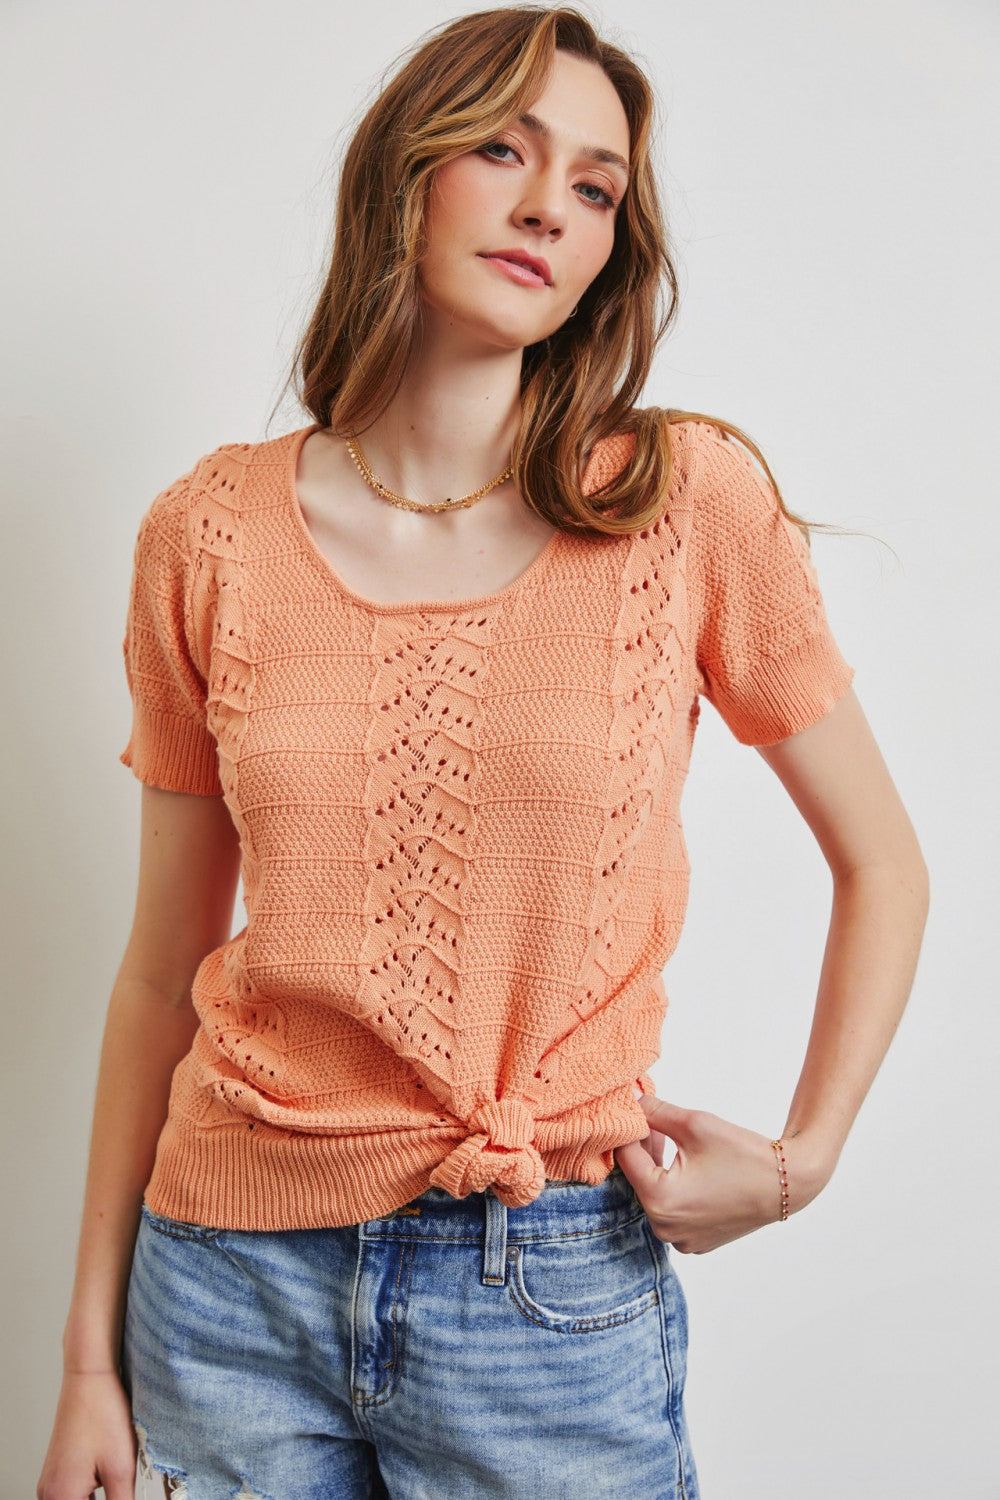 No More Words Knit Top